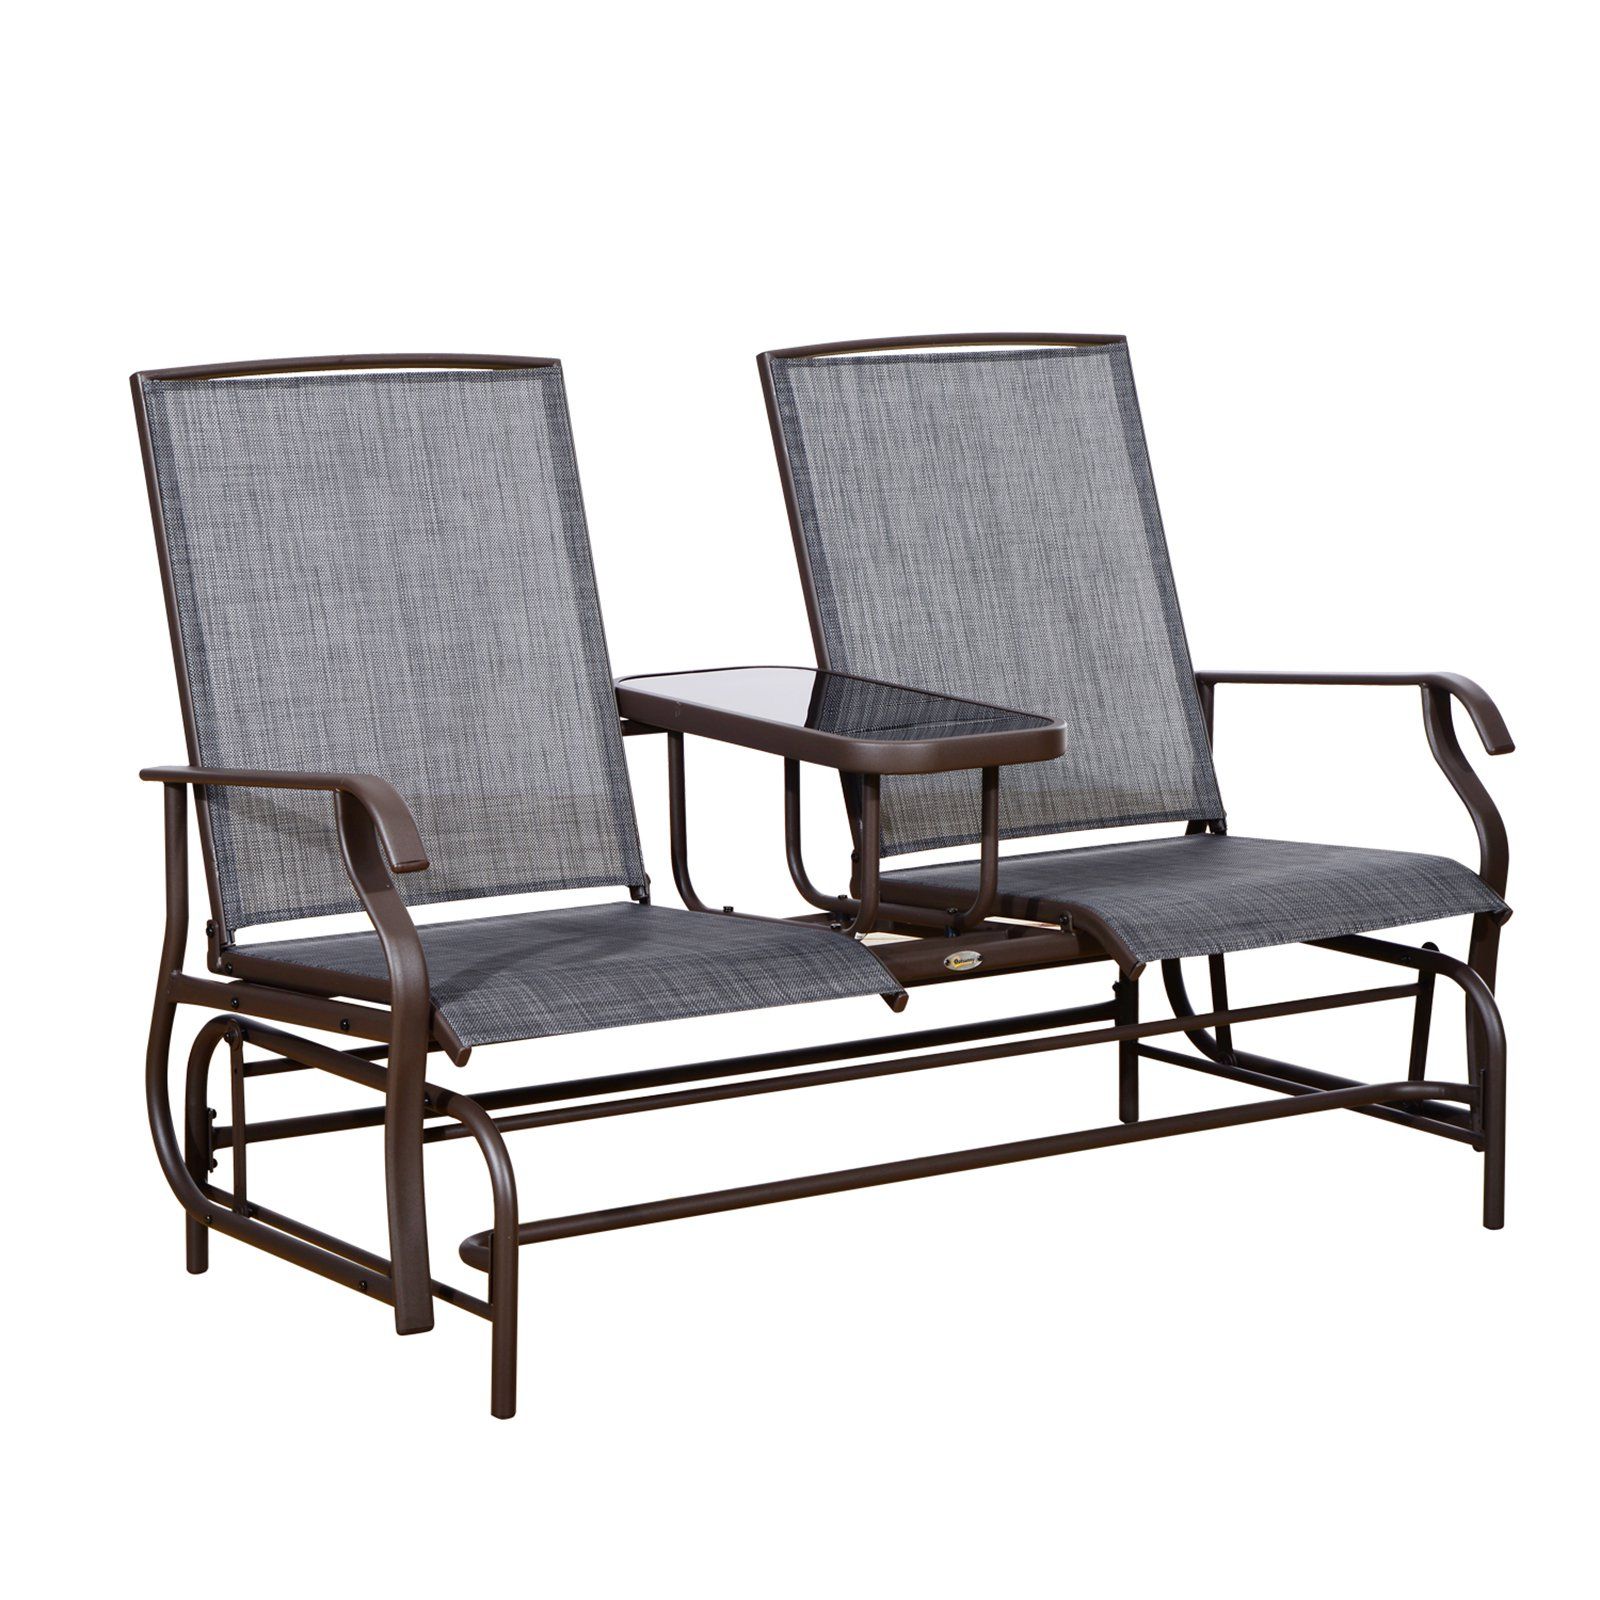 Outsunny 2 Person Mesh Fabric Patio Double Glider Chair With Pertaining To Center Table Double Glider Benches (View 1 of 25)